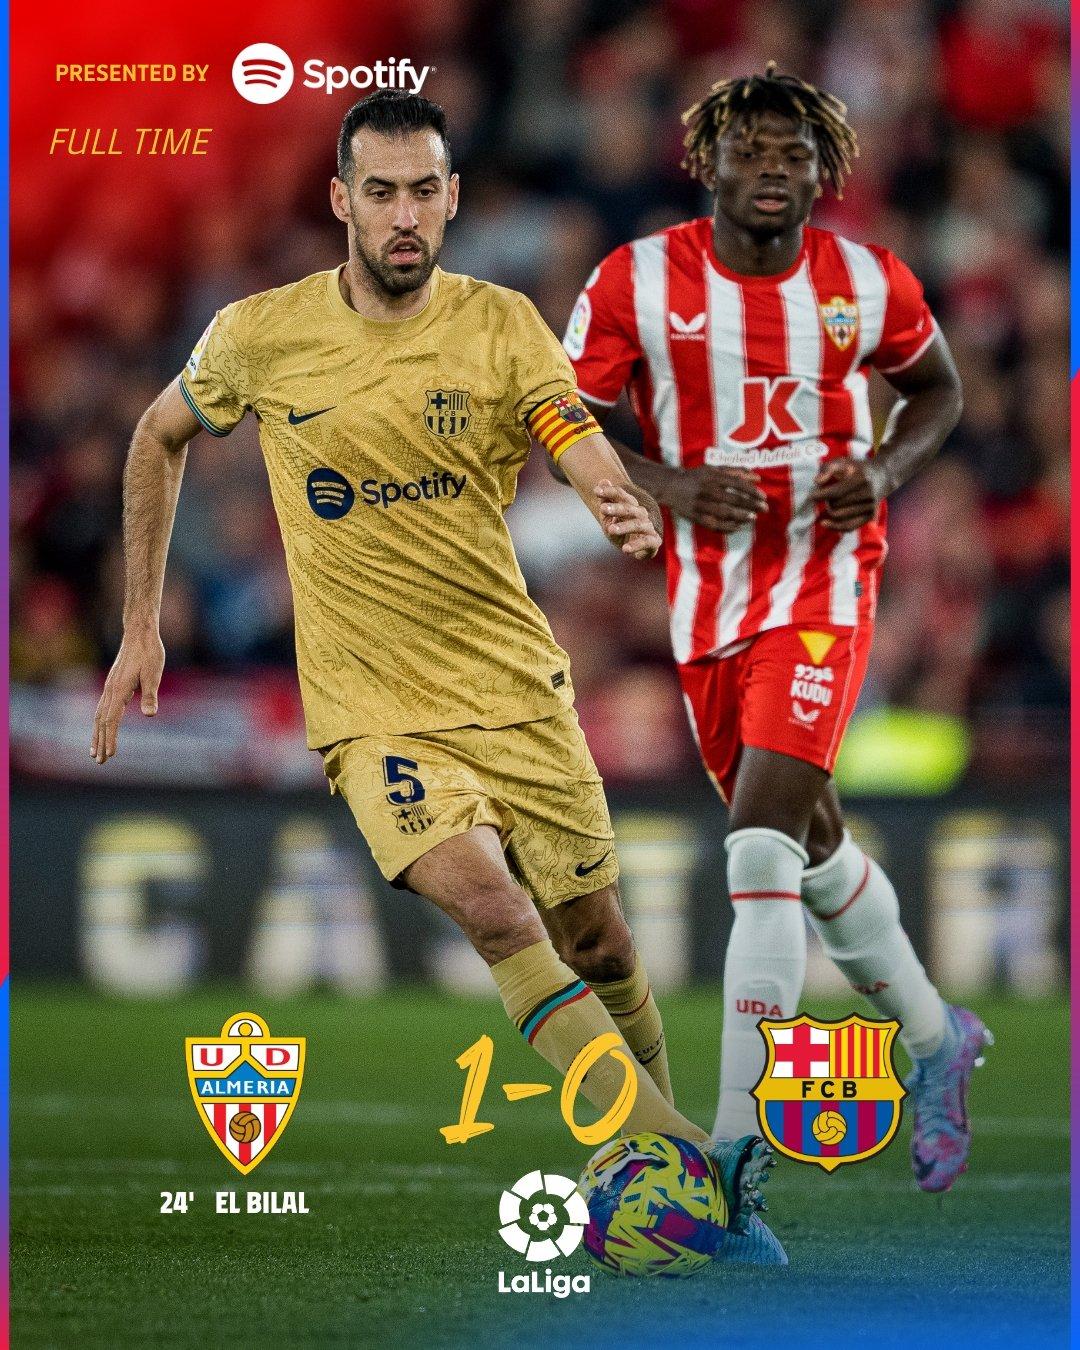 First defeat in official Barcelona club history to Almeria